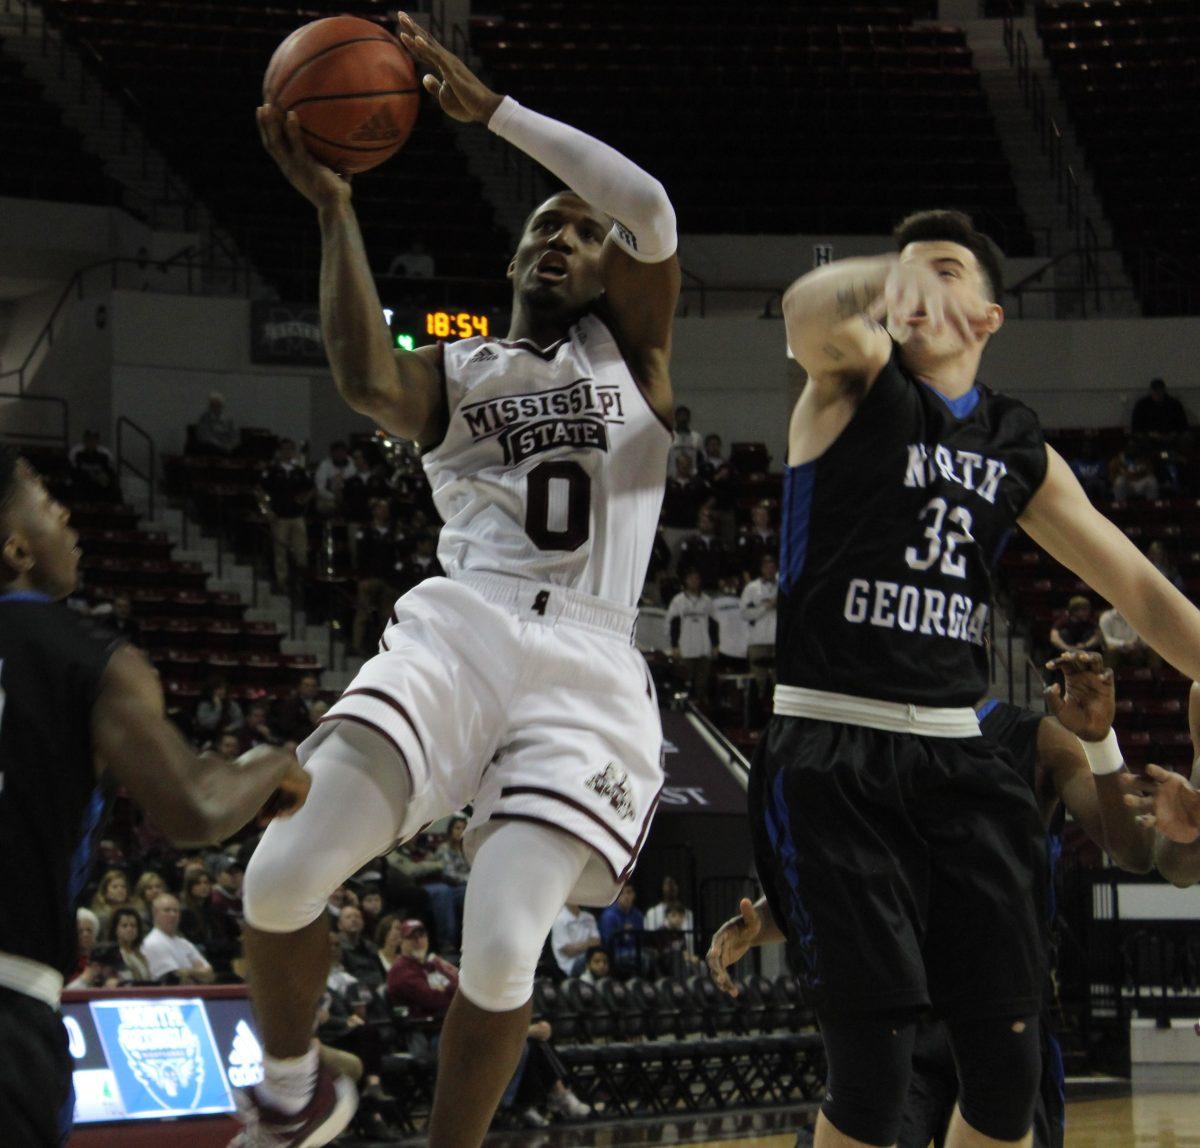 Nick Weatherspoon, true freshman from Canton, scored nine points and went 4-8 from the field in Mississippi State Universitys 95-62 win over the University of North Georgia. The Bulldogs next game is on Tuesday against the University of Cincinnati.  